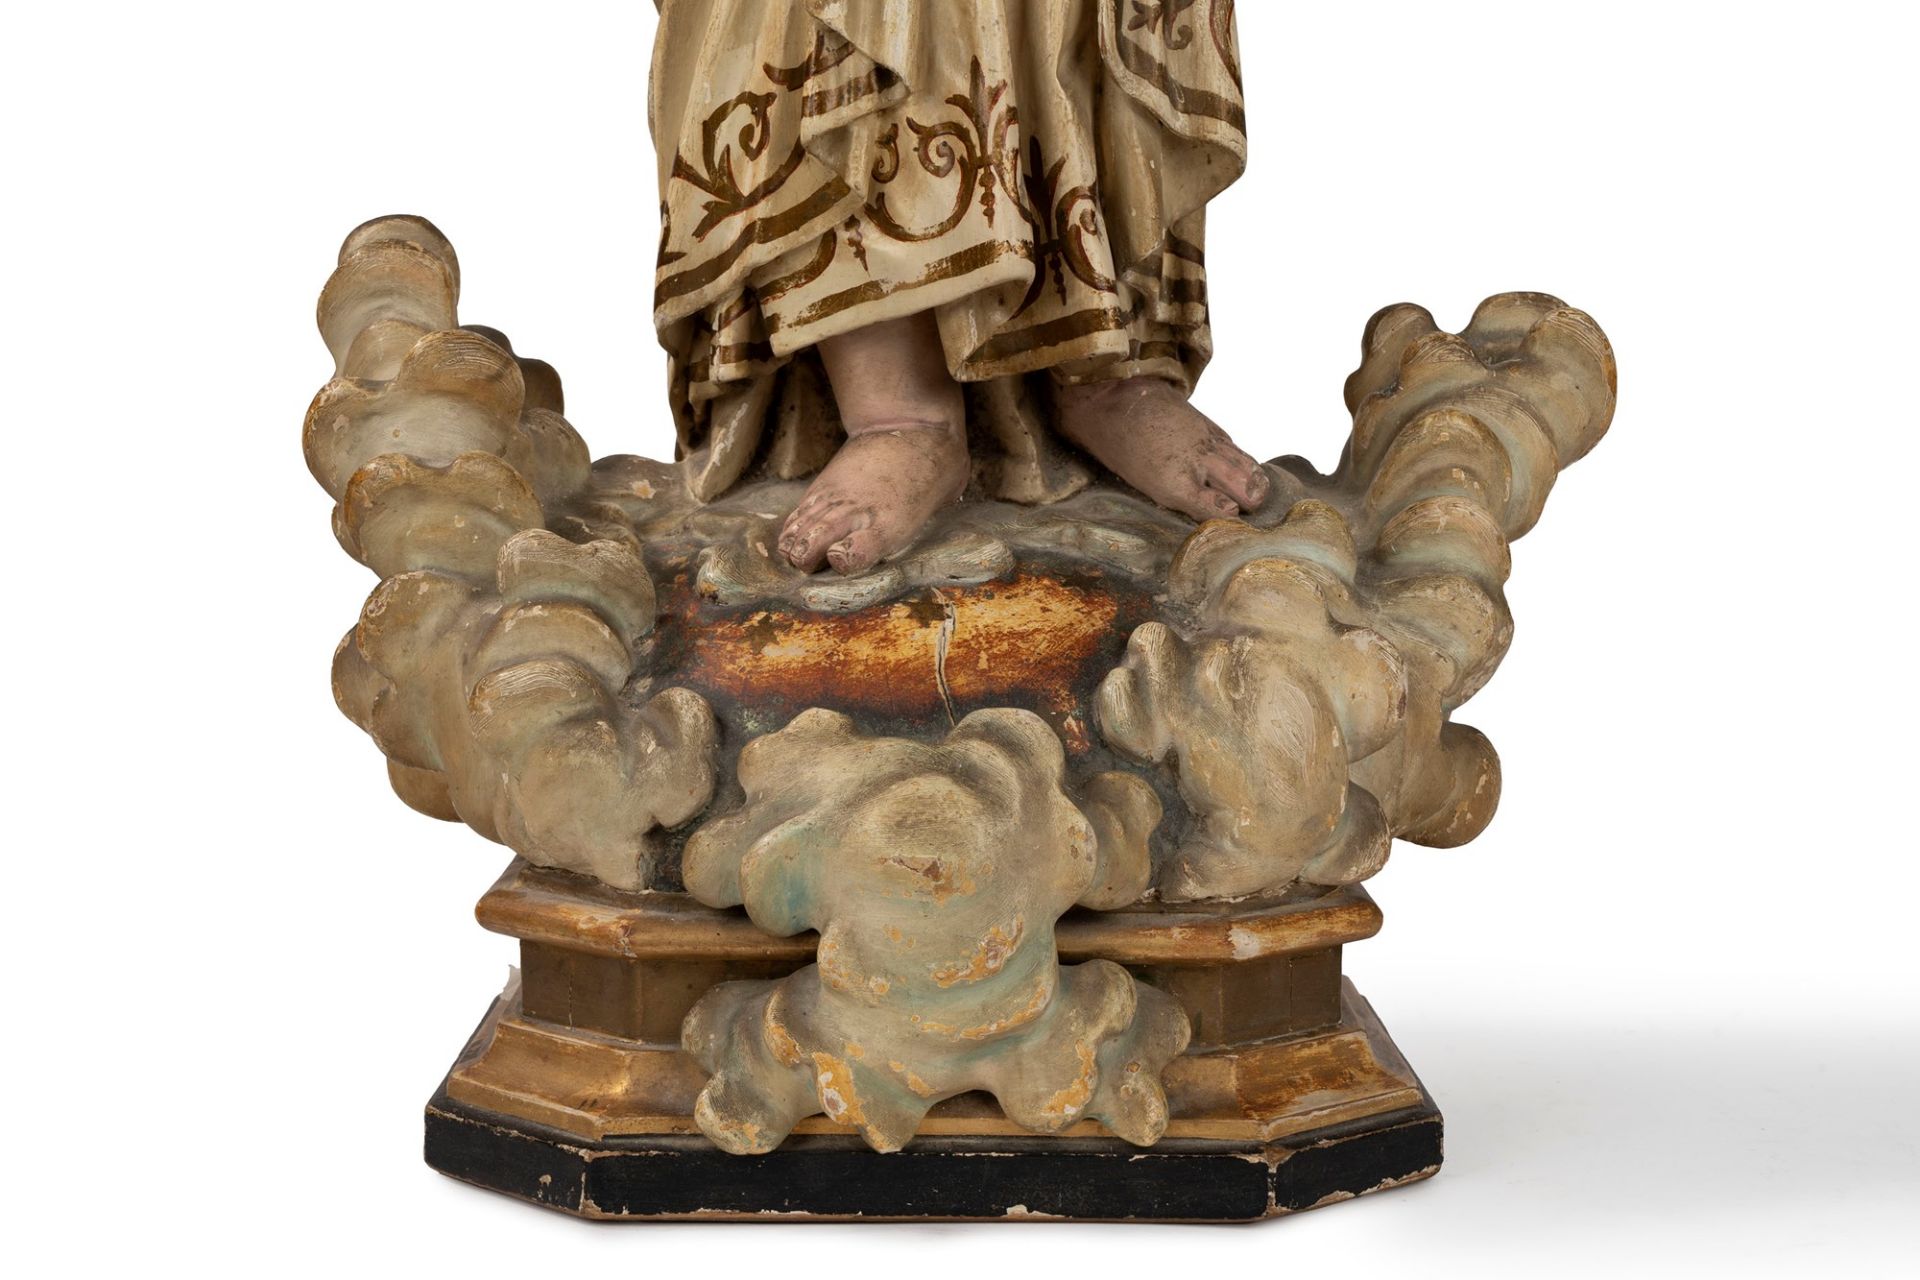 Baby Jesus in carved and lacquered wood, 19th century - Image 4 of 8